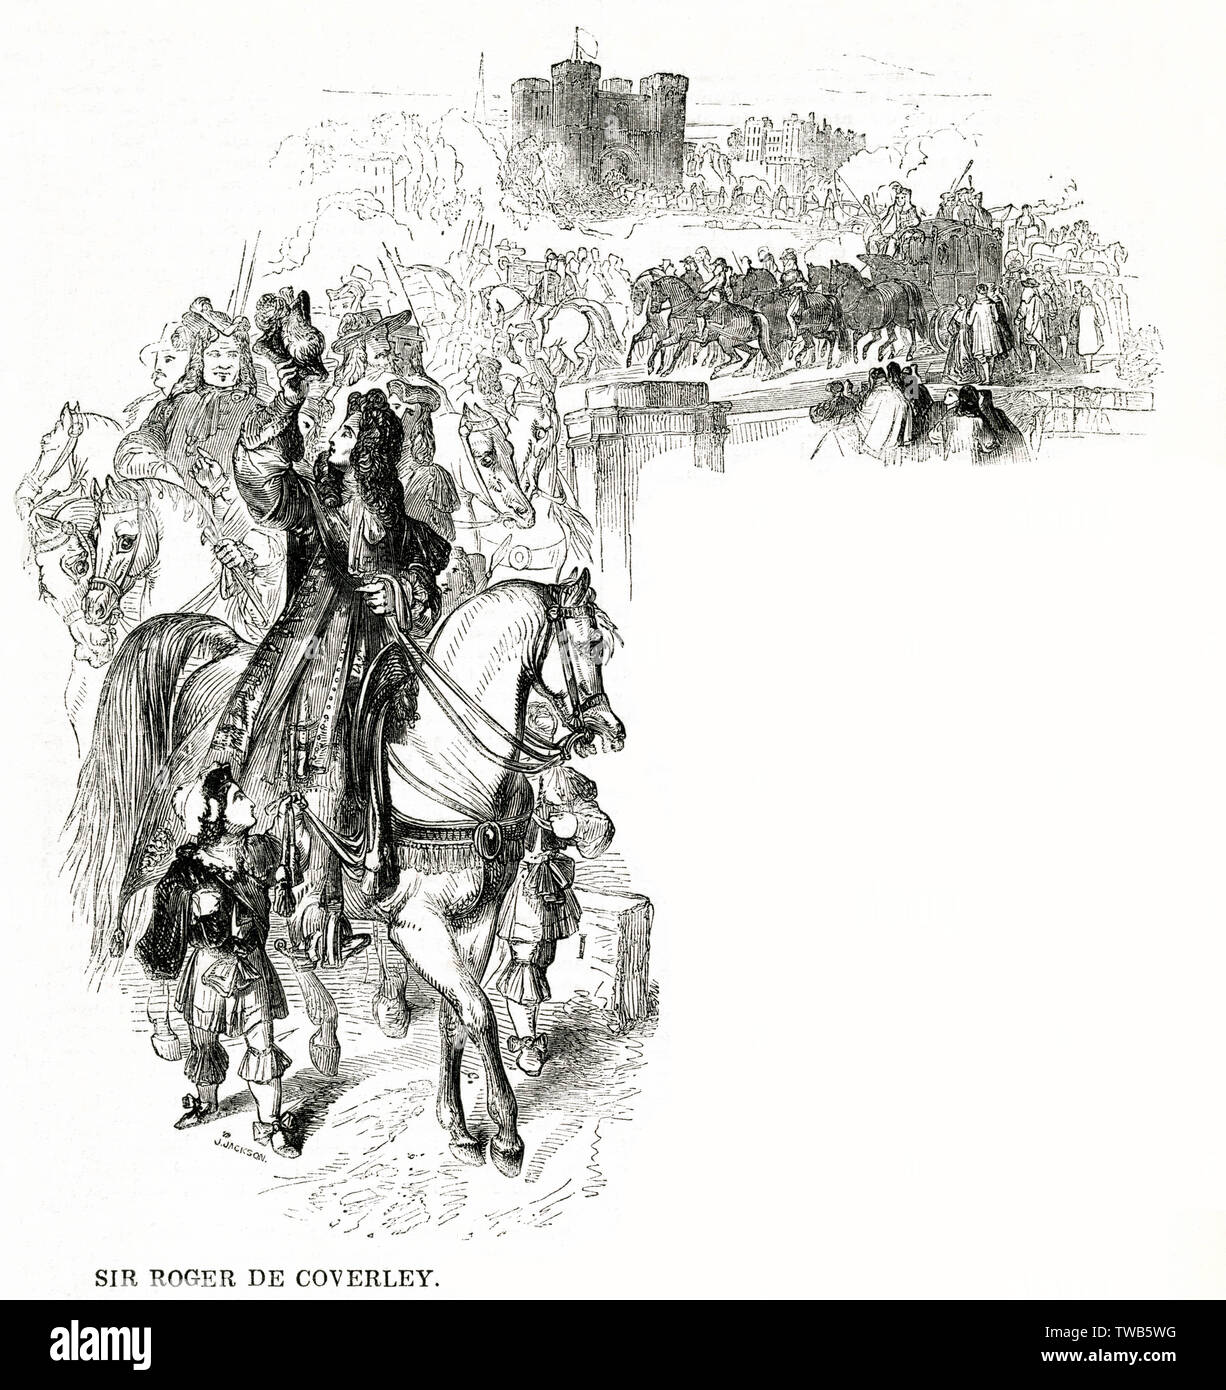 Sir Roger de Coverley, a fictitious country squire character created by Joseph Addison in The Spectator in the early 18th century, after whom a dance was named. Seen here on horseback at the head of a long procession, having been appointed sheriff for his district.     Date: 1843 Stock Photo